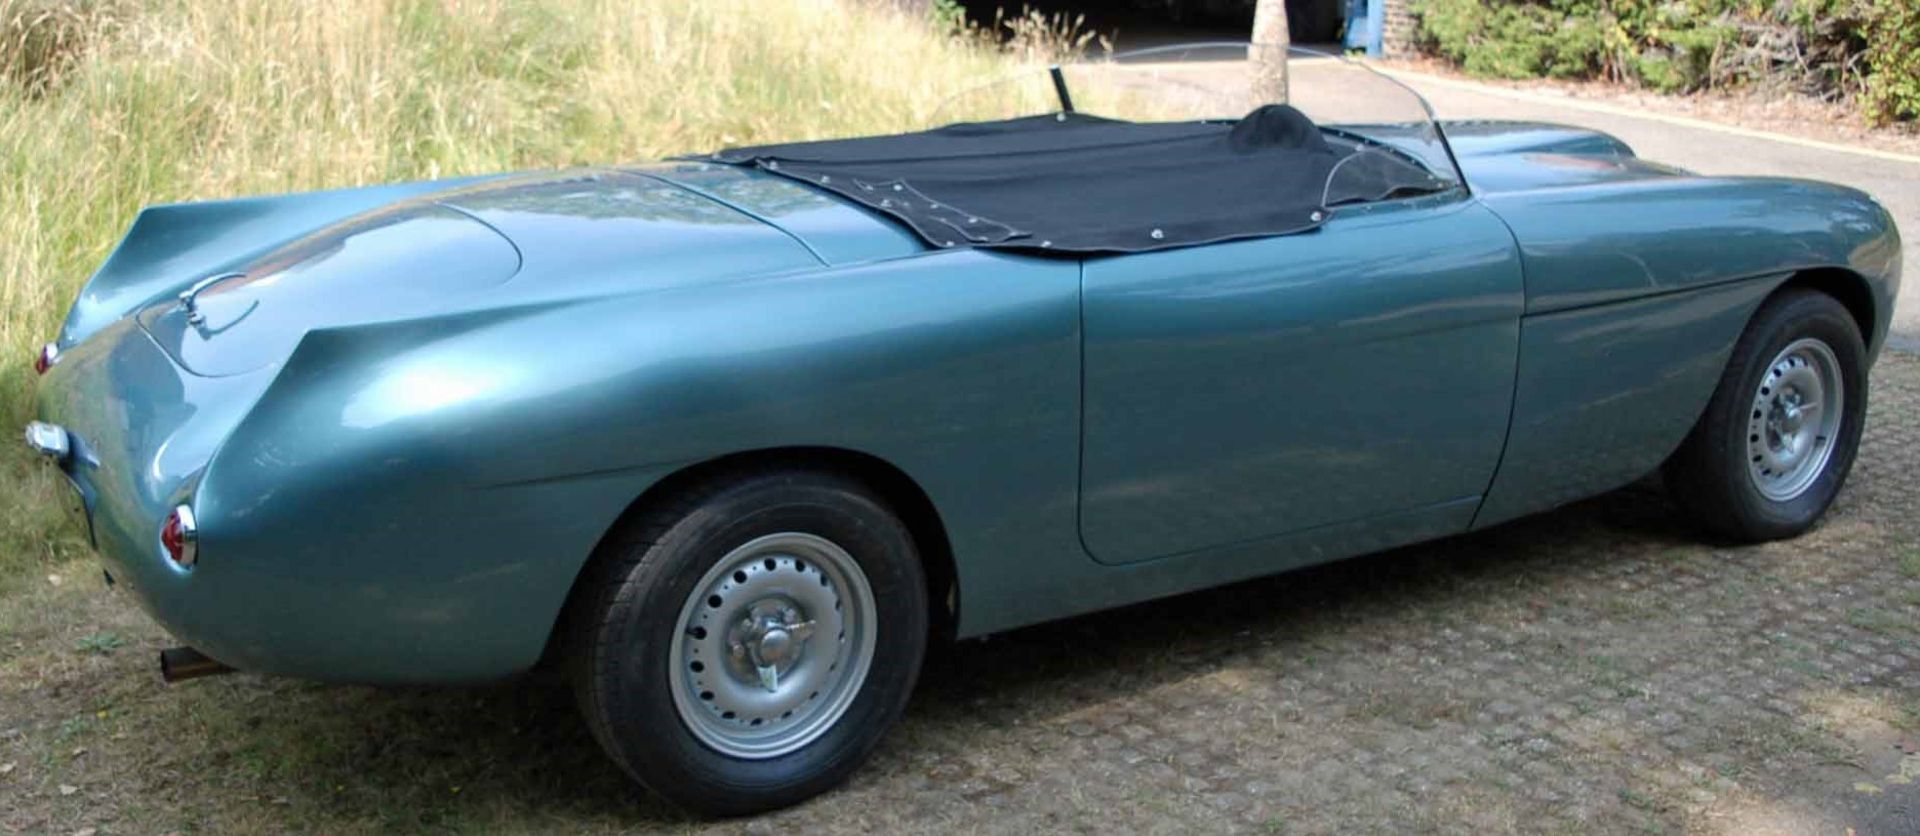 The 1964 Bristol 409 Bullet Speedster. The original Bullet, this car started life as a Bristol 409 - Image 7 of 17